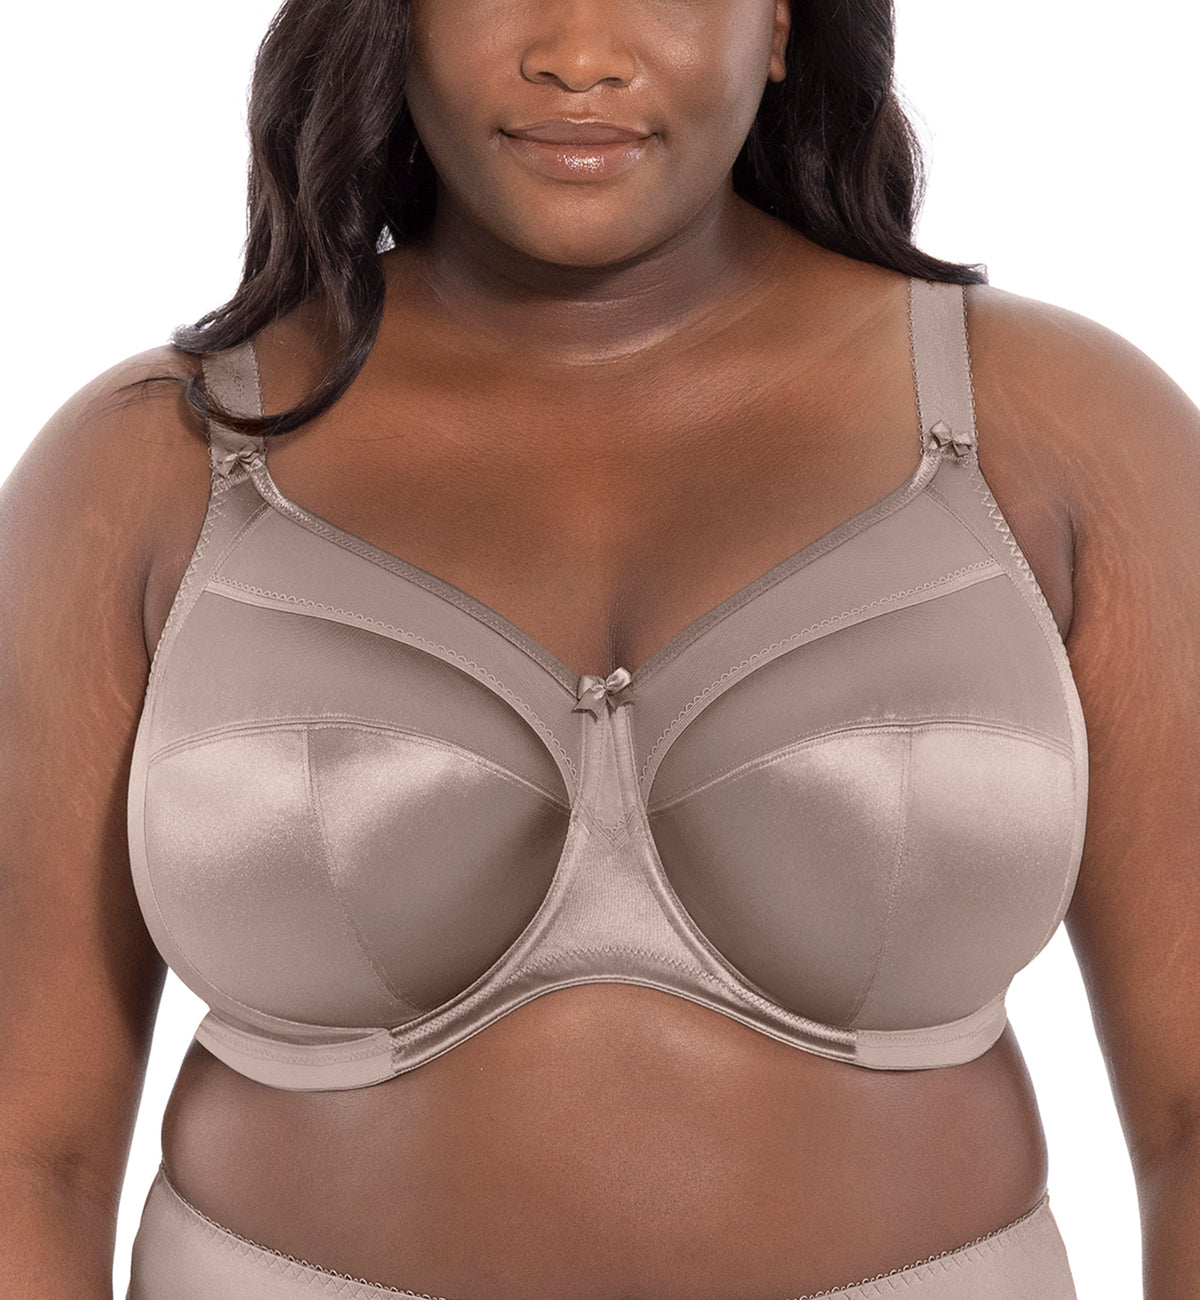 Goddess Keira Bra 6090 Underwired Full Cup Supportive Full Figures